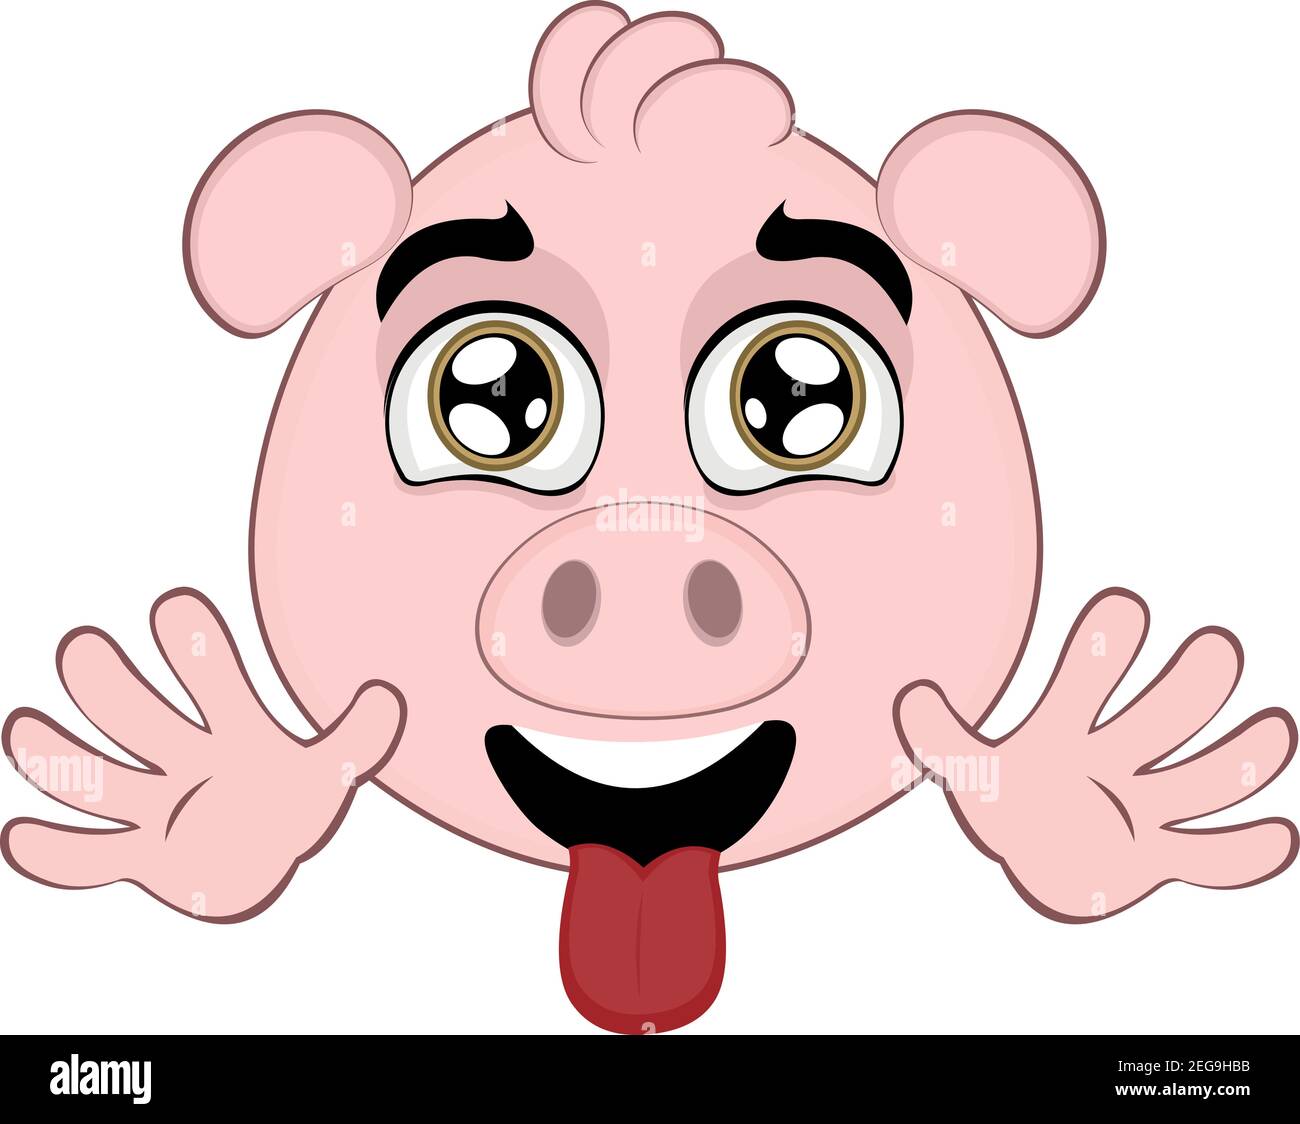 Vector emoticon  illustration cartoon of a pig´s head with happy expression, raising both hands and sticking out the tongue Stock Vector